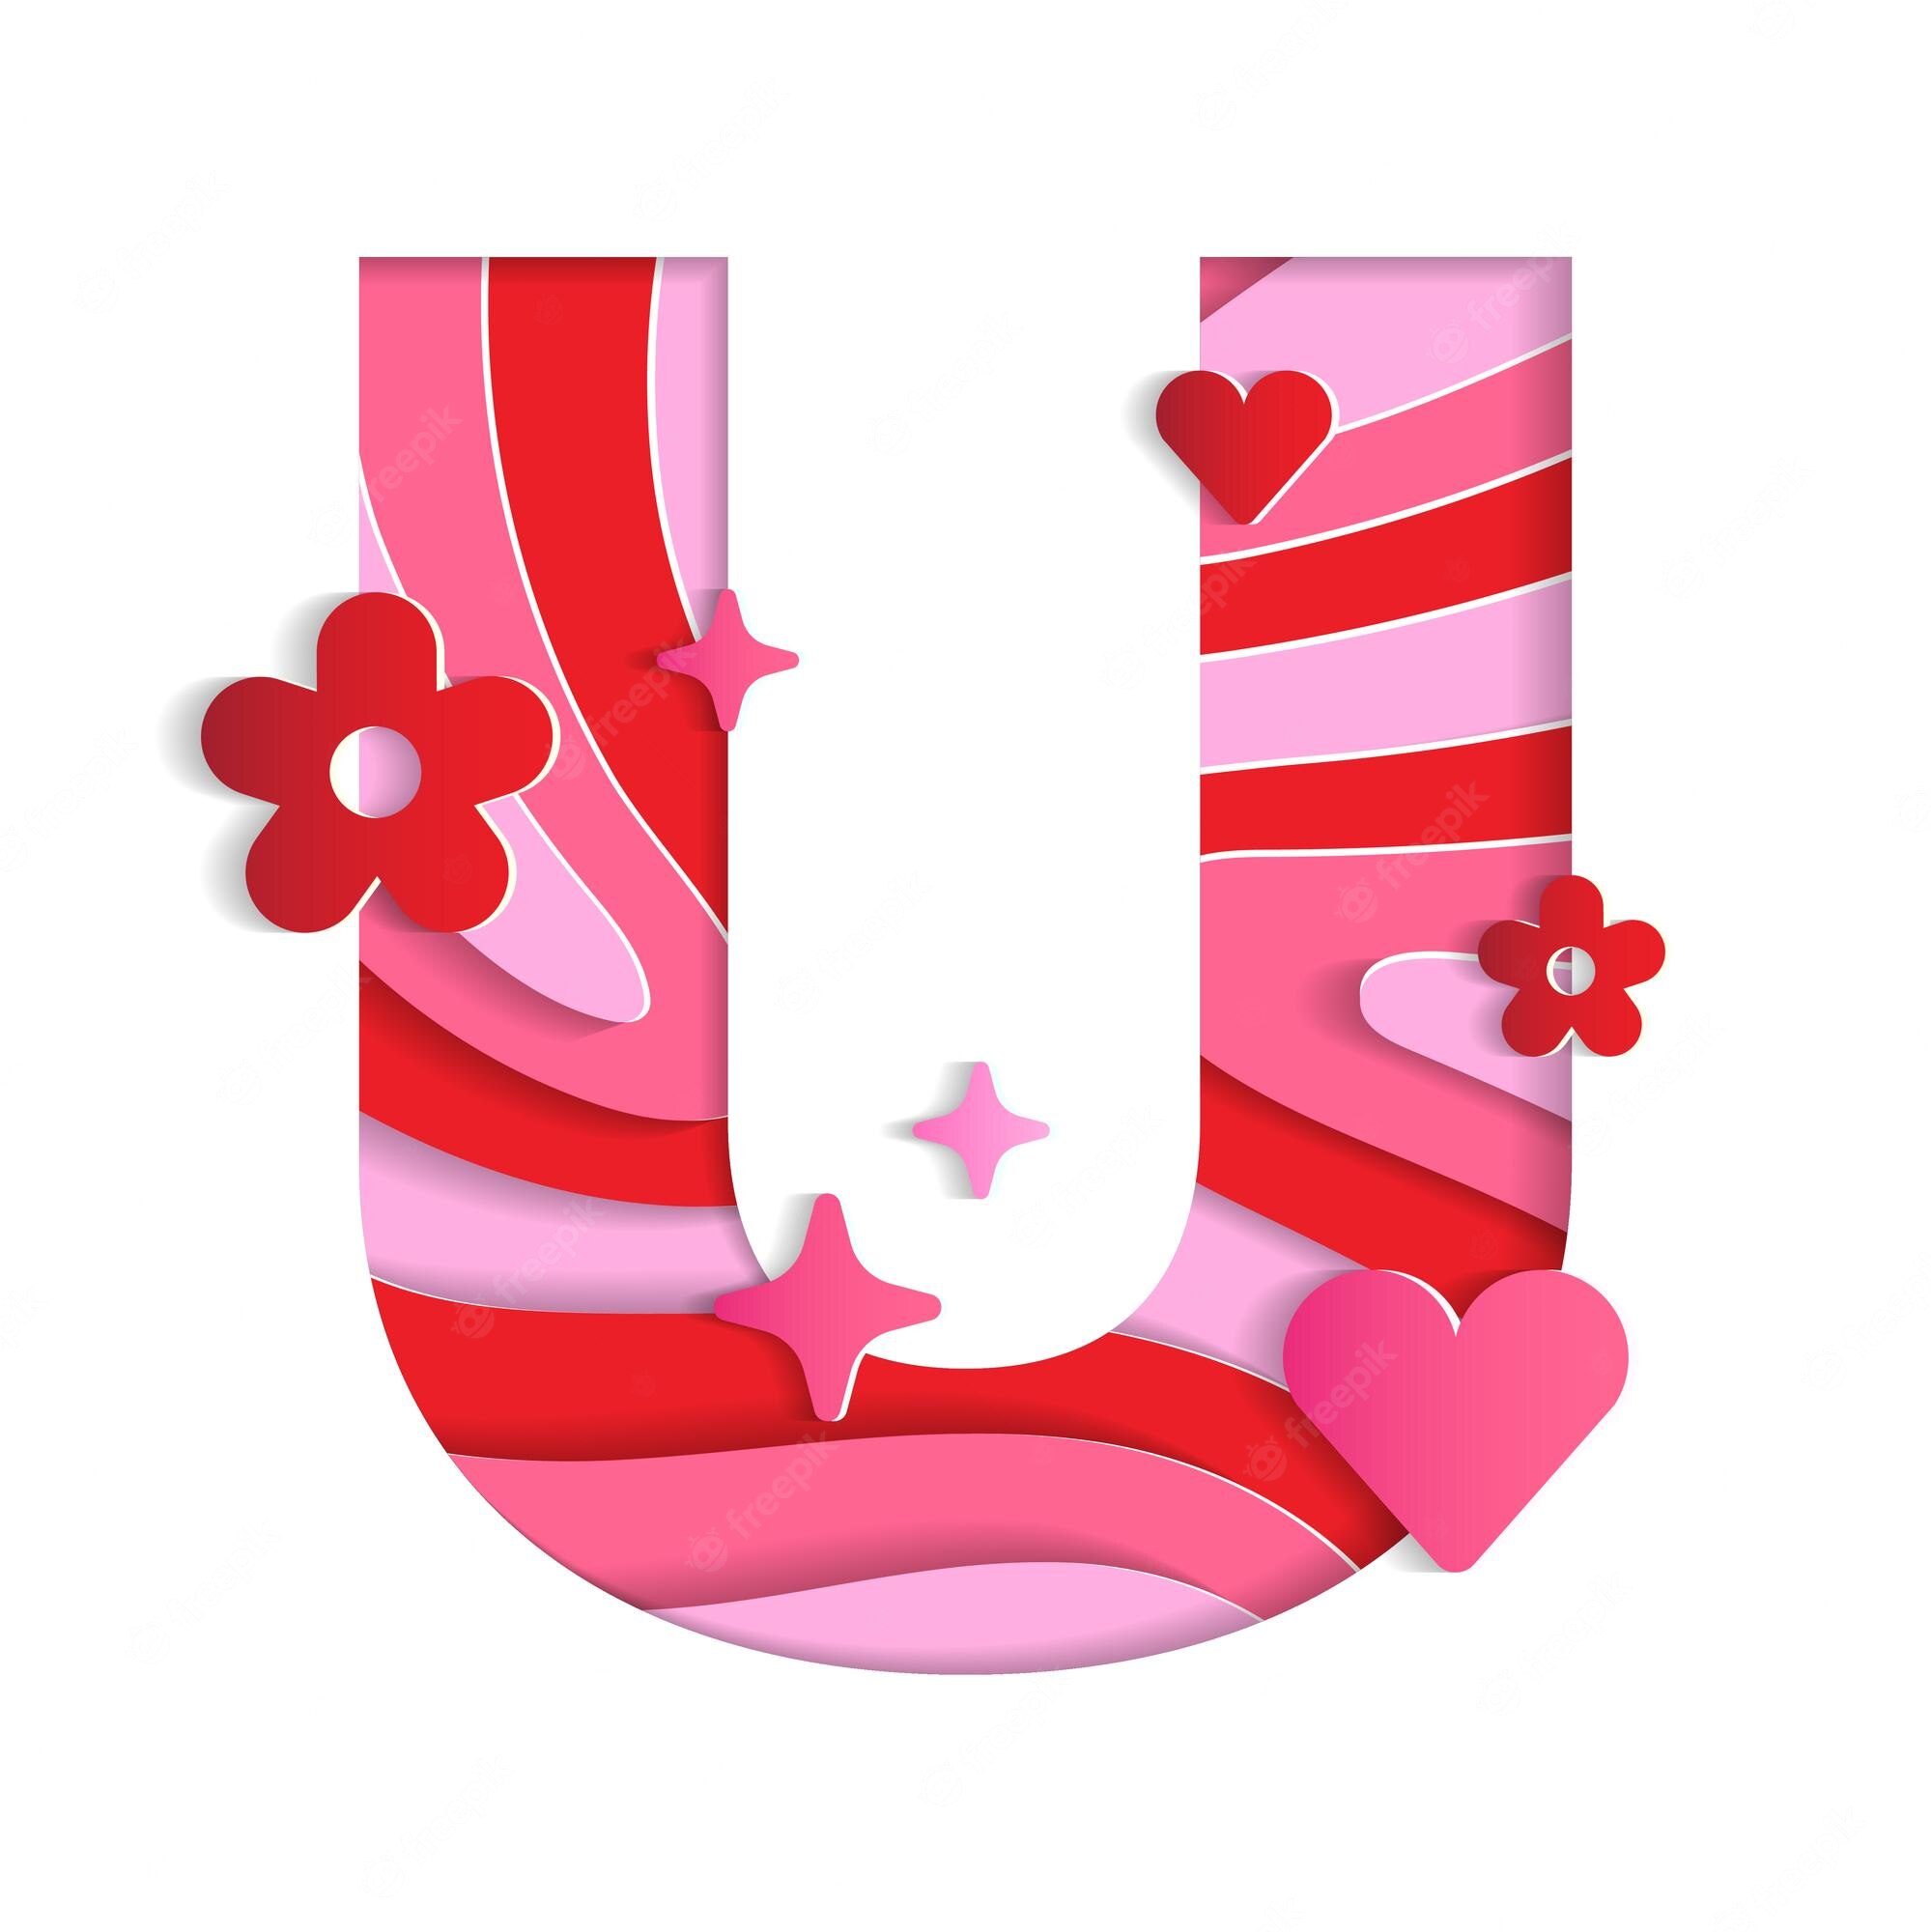 u alphabet valentines day love character font letter paper flower heart 3d layer paper cutout card 307151 970